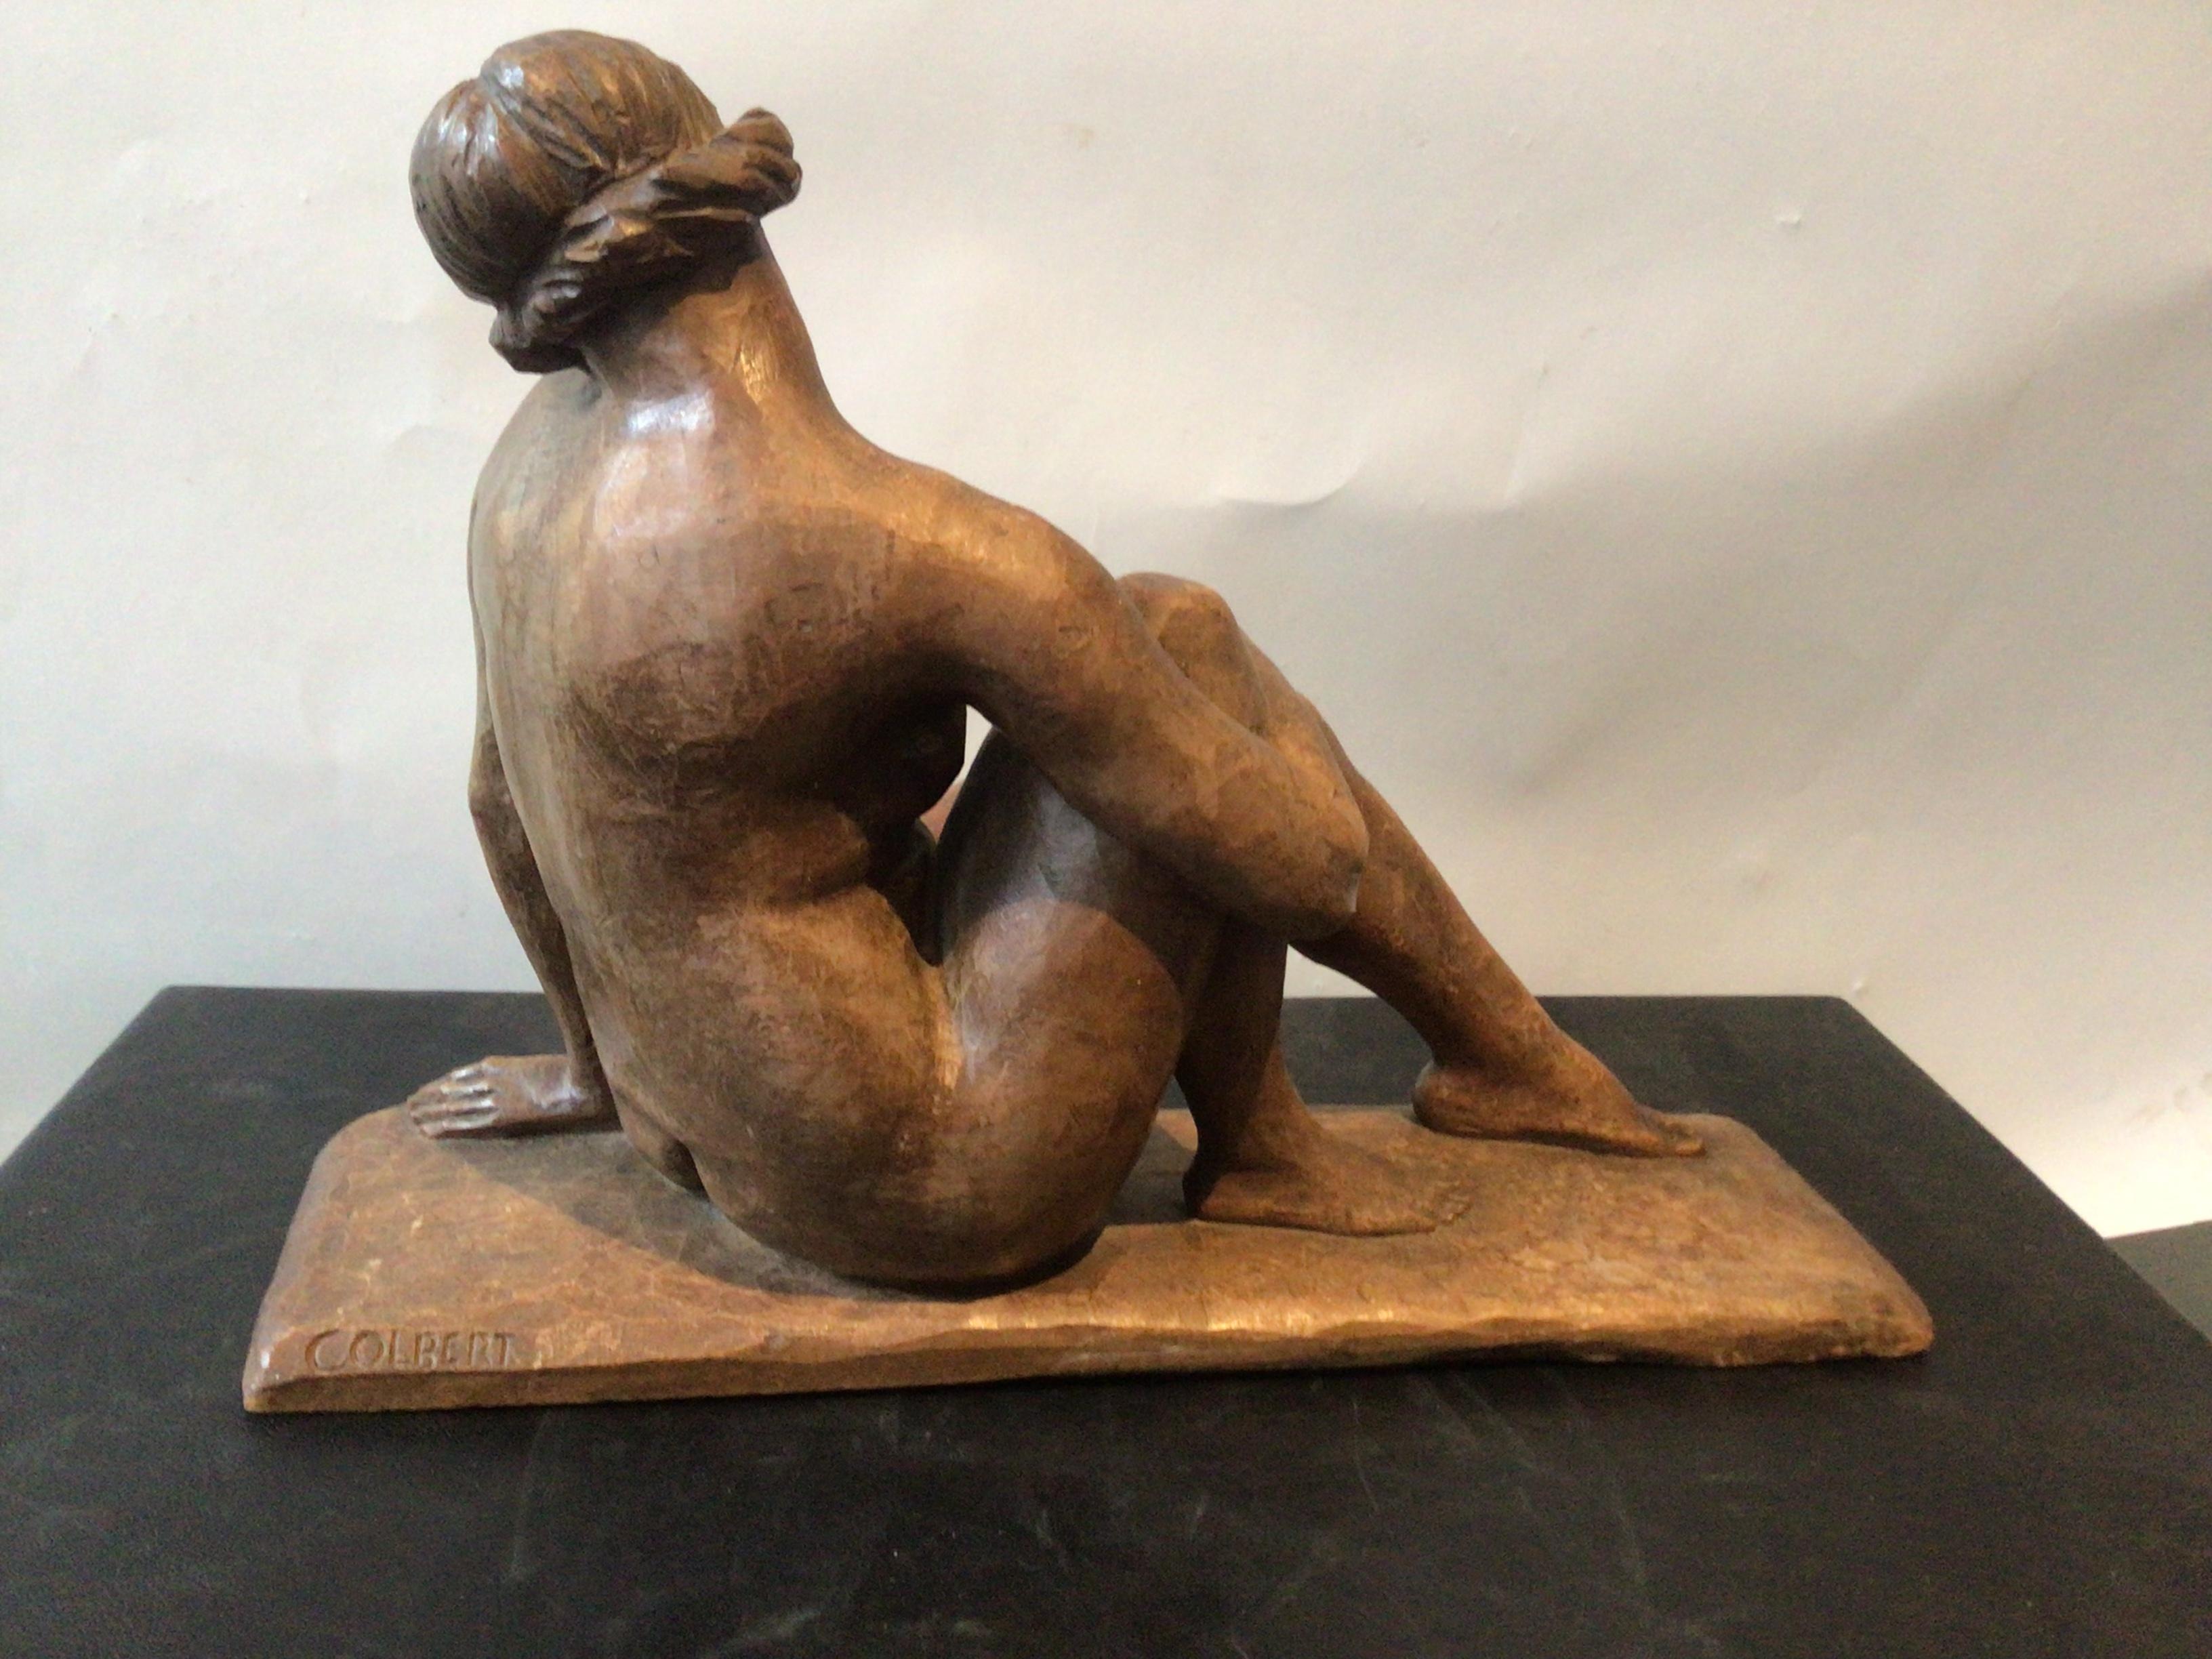 1930s Deco Carved Wood Sculpture of Nude Female Signed Colbert 2